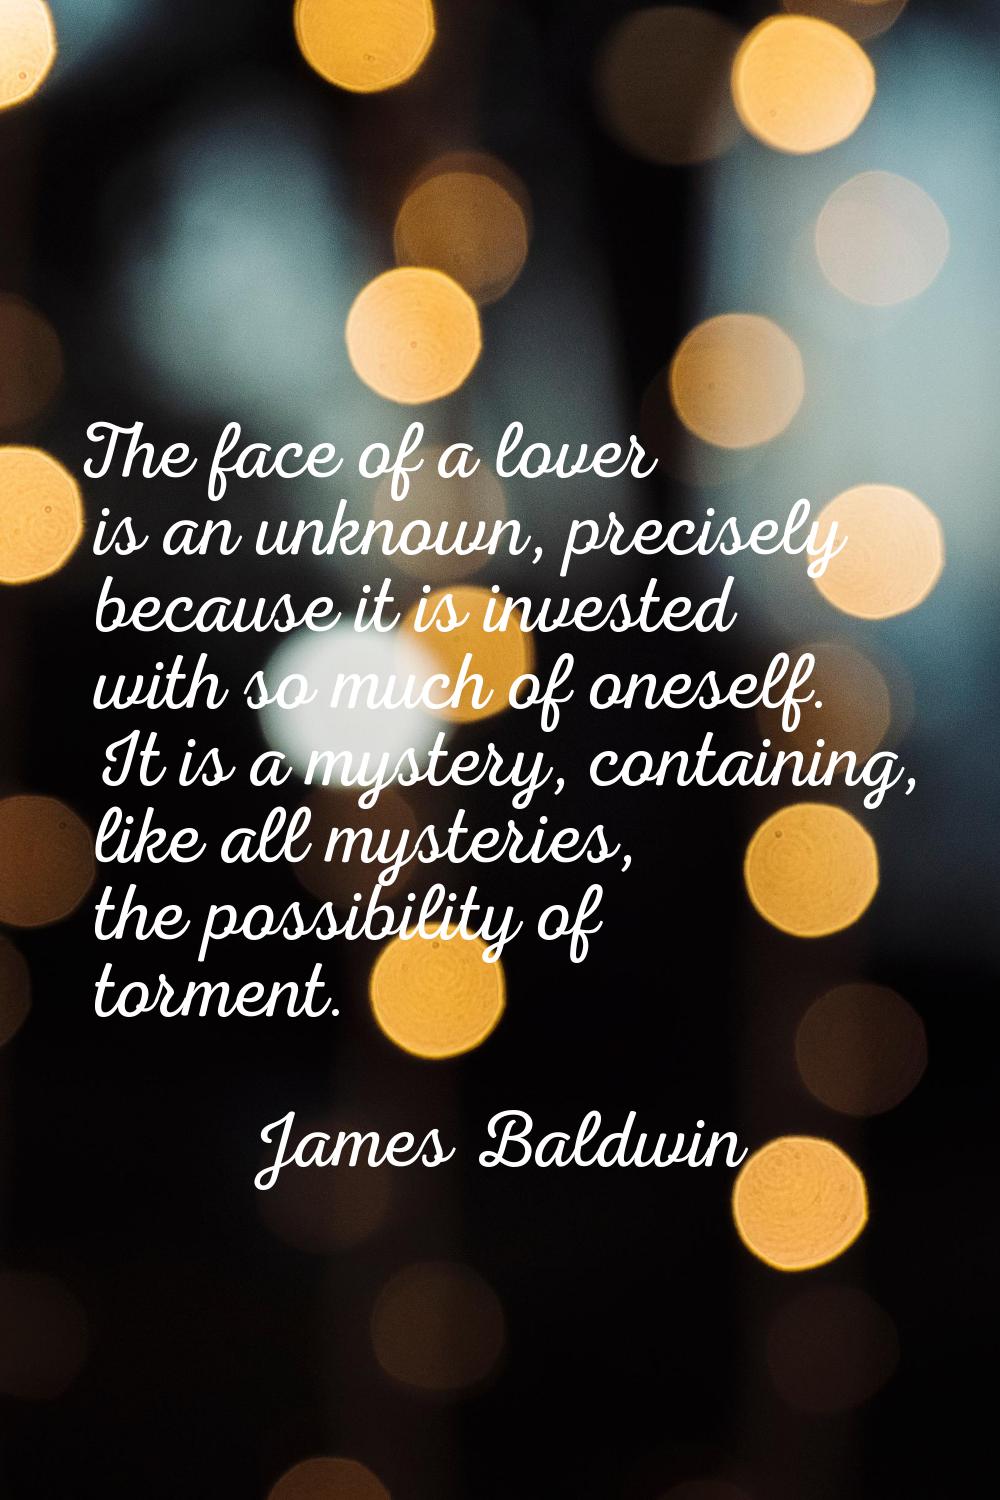 The face of a lover is an unknown, precisely because it is invested with so much of oneself. It is 